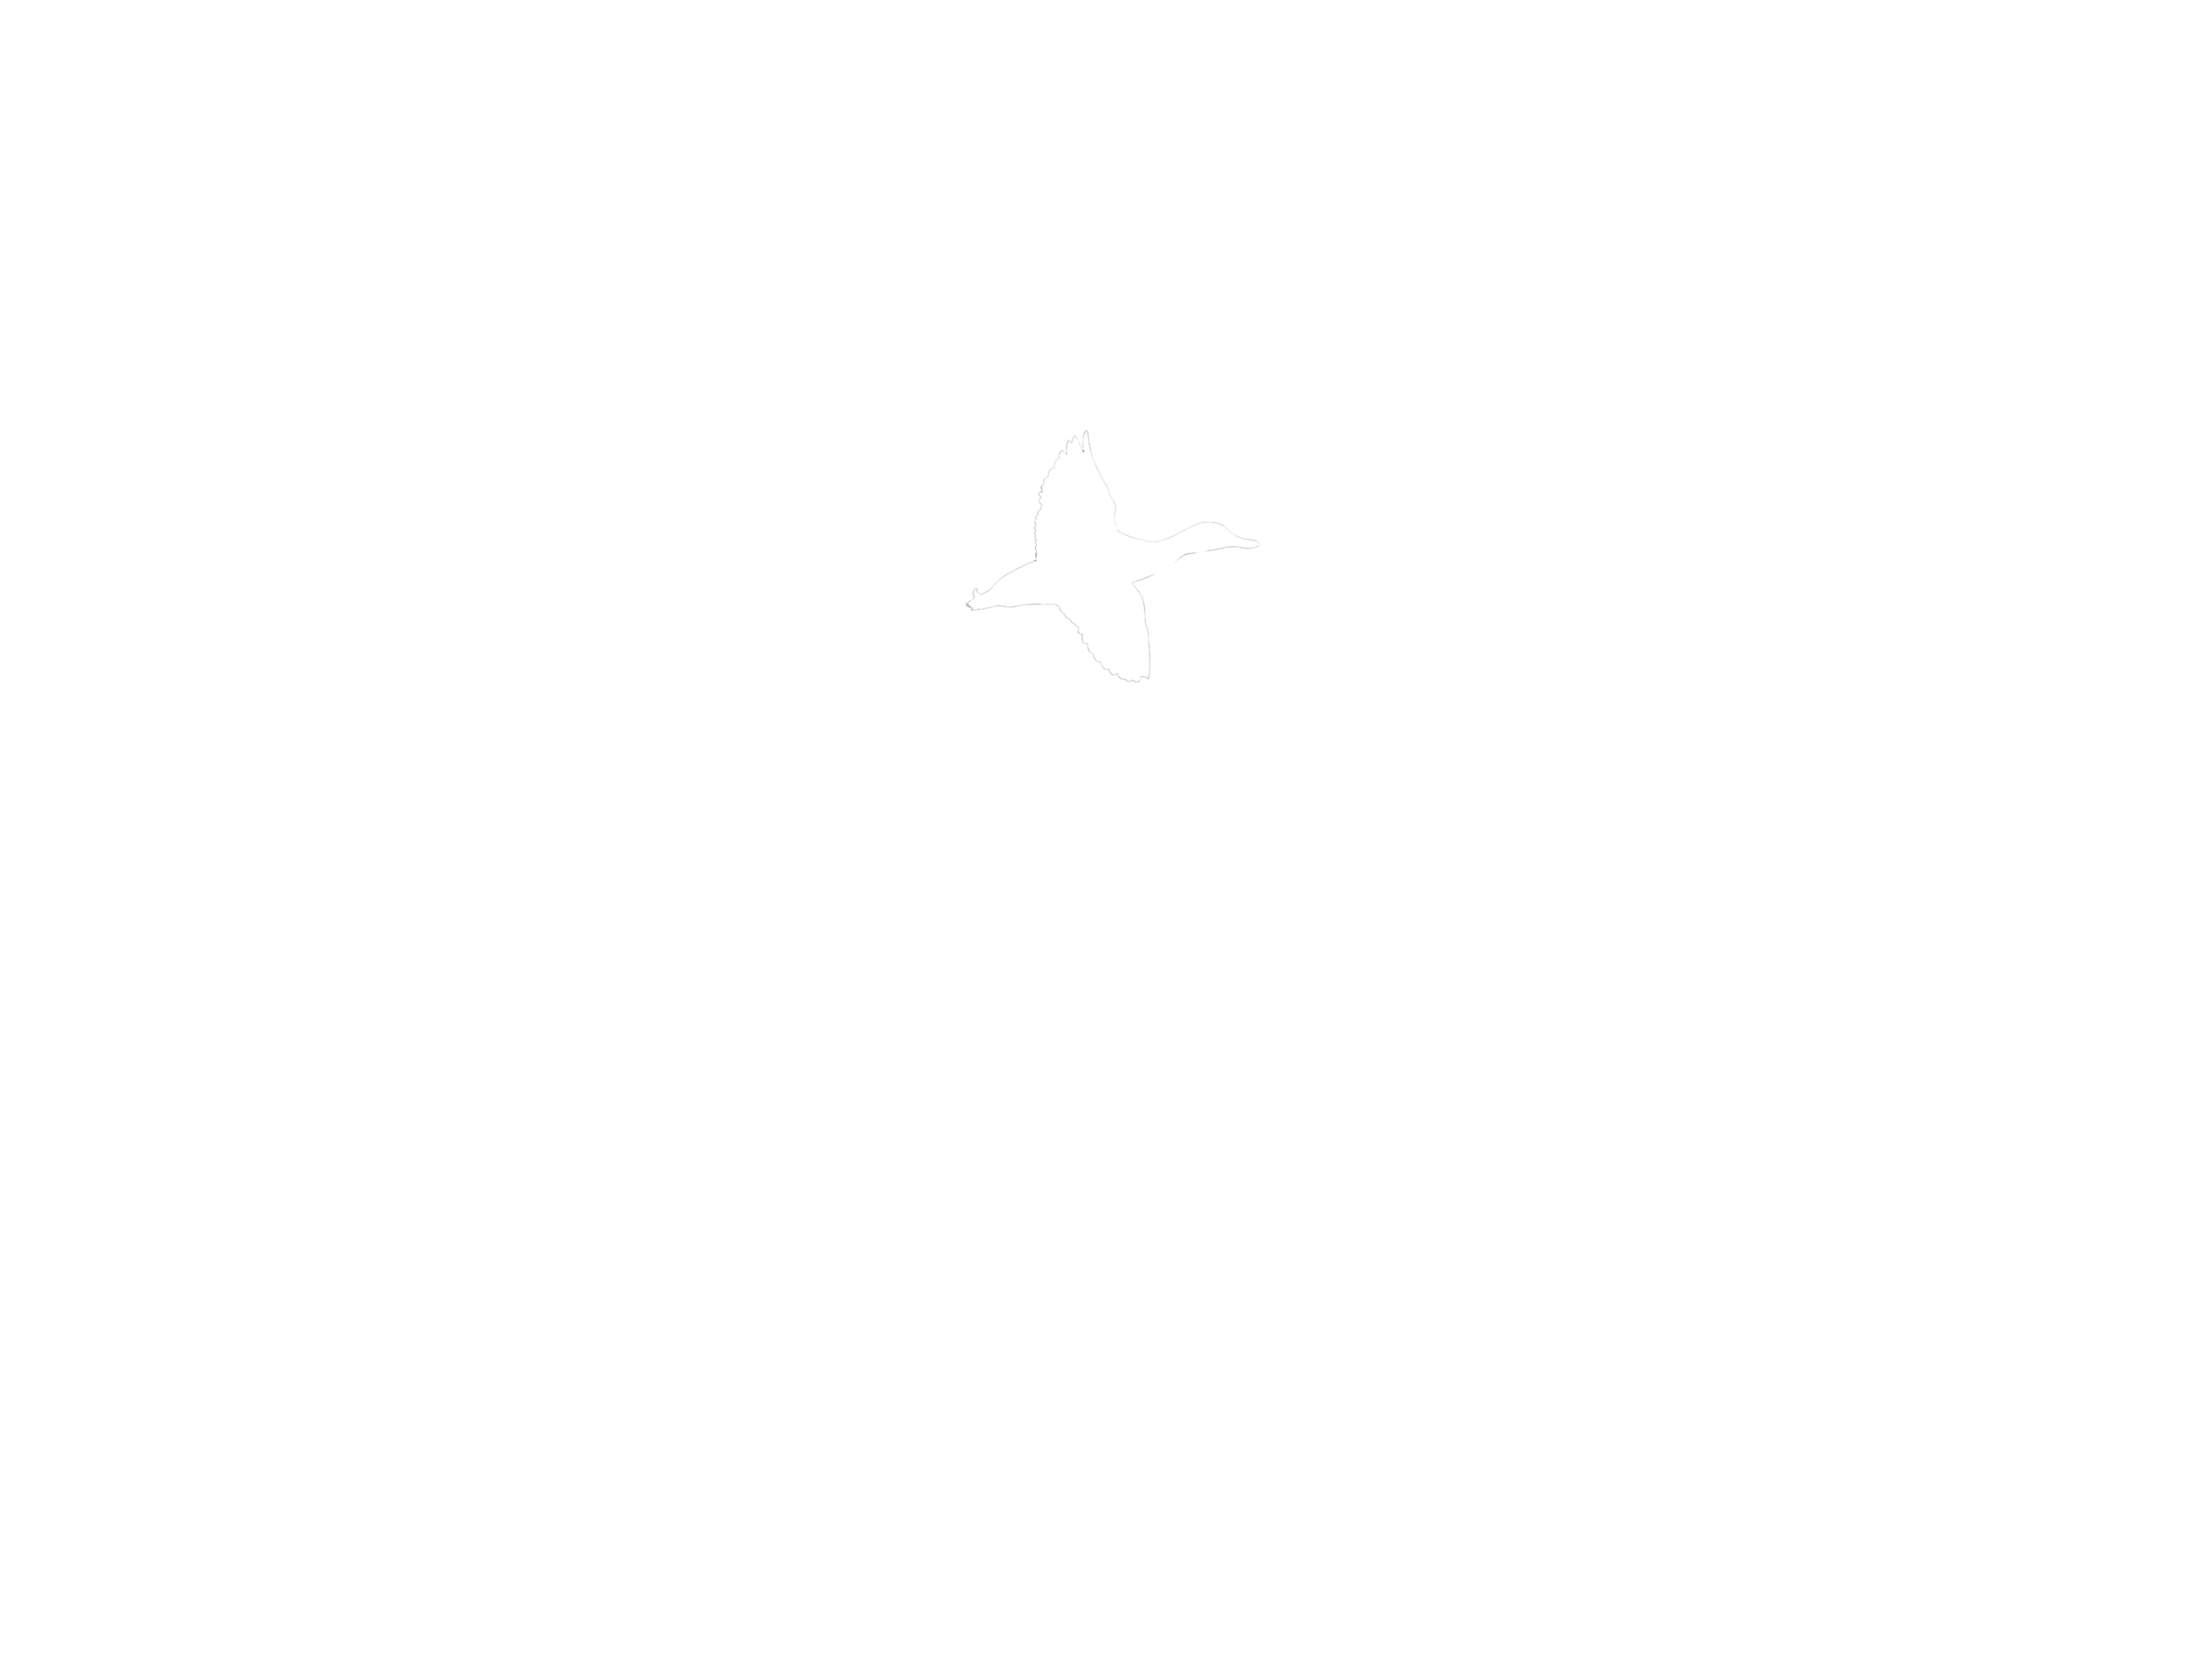 Coldwater Duck Co